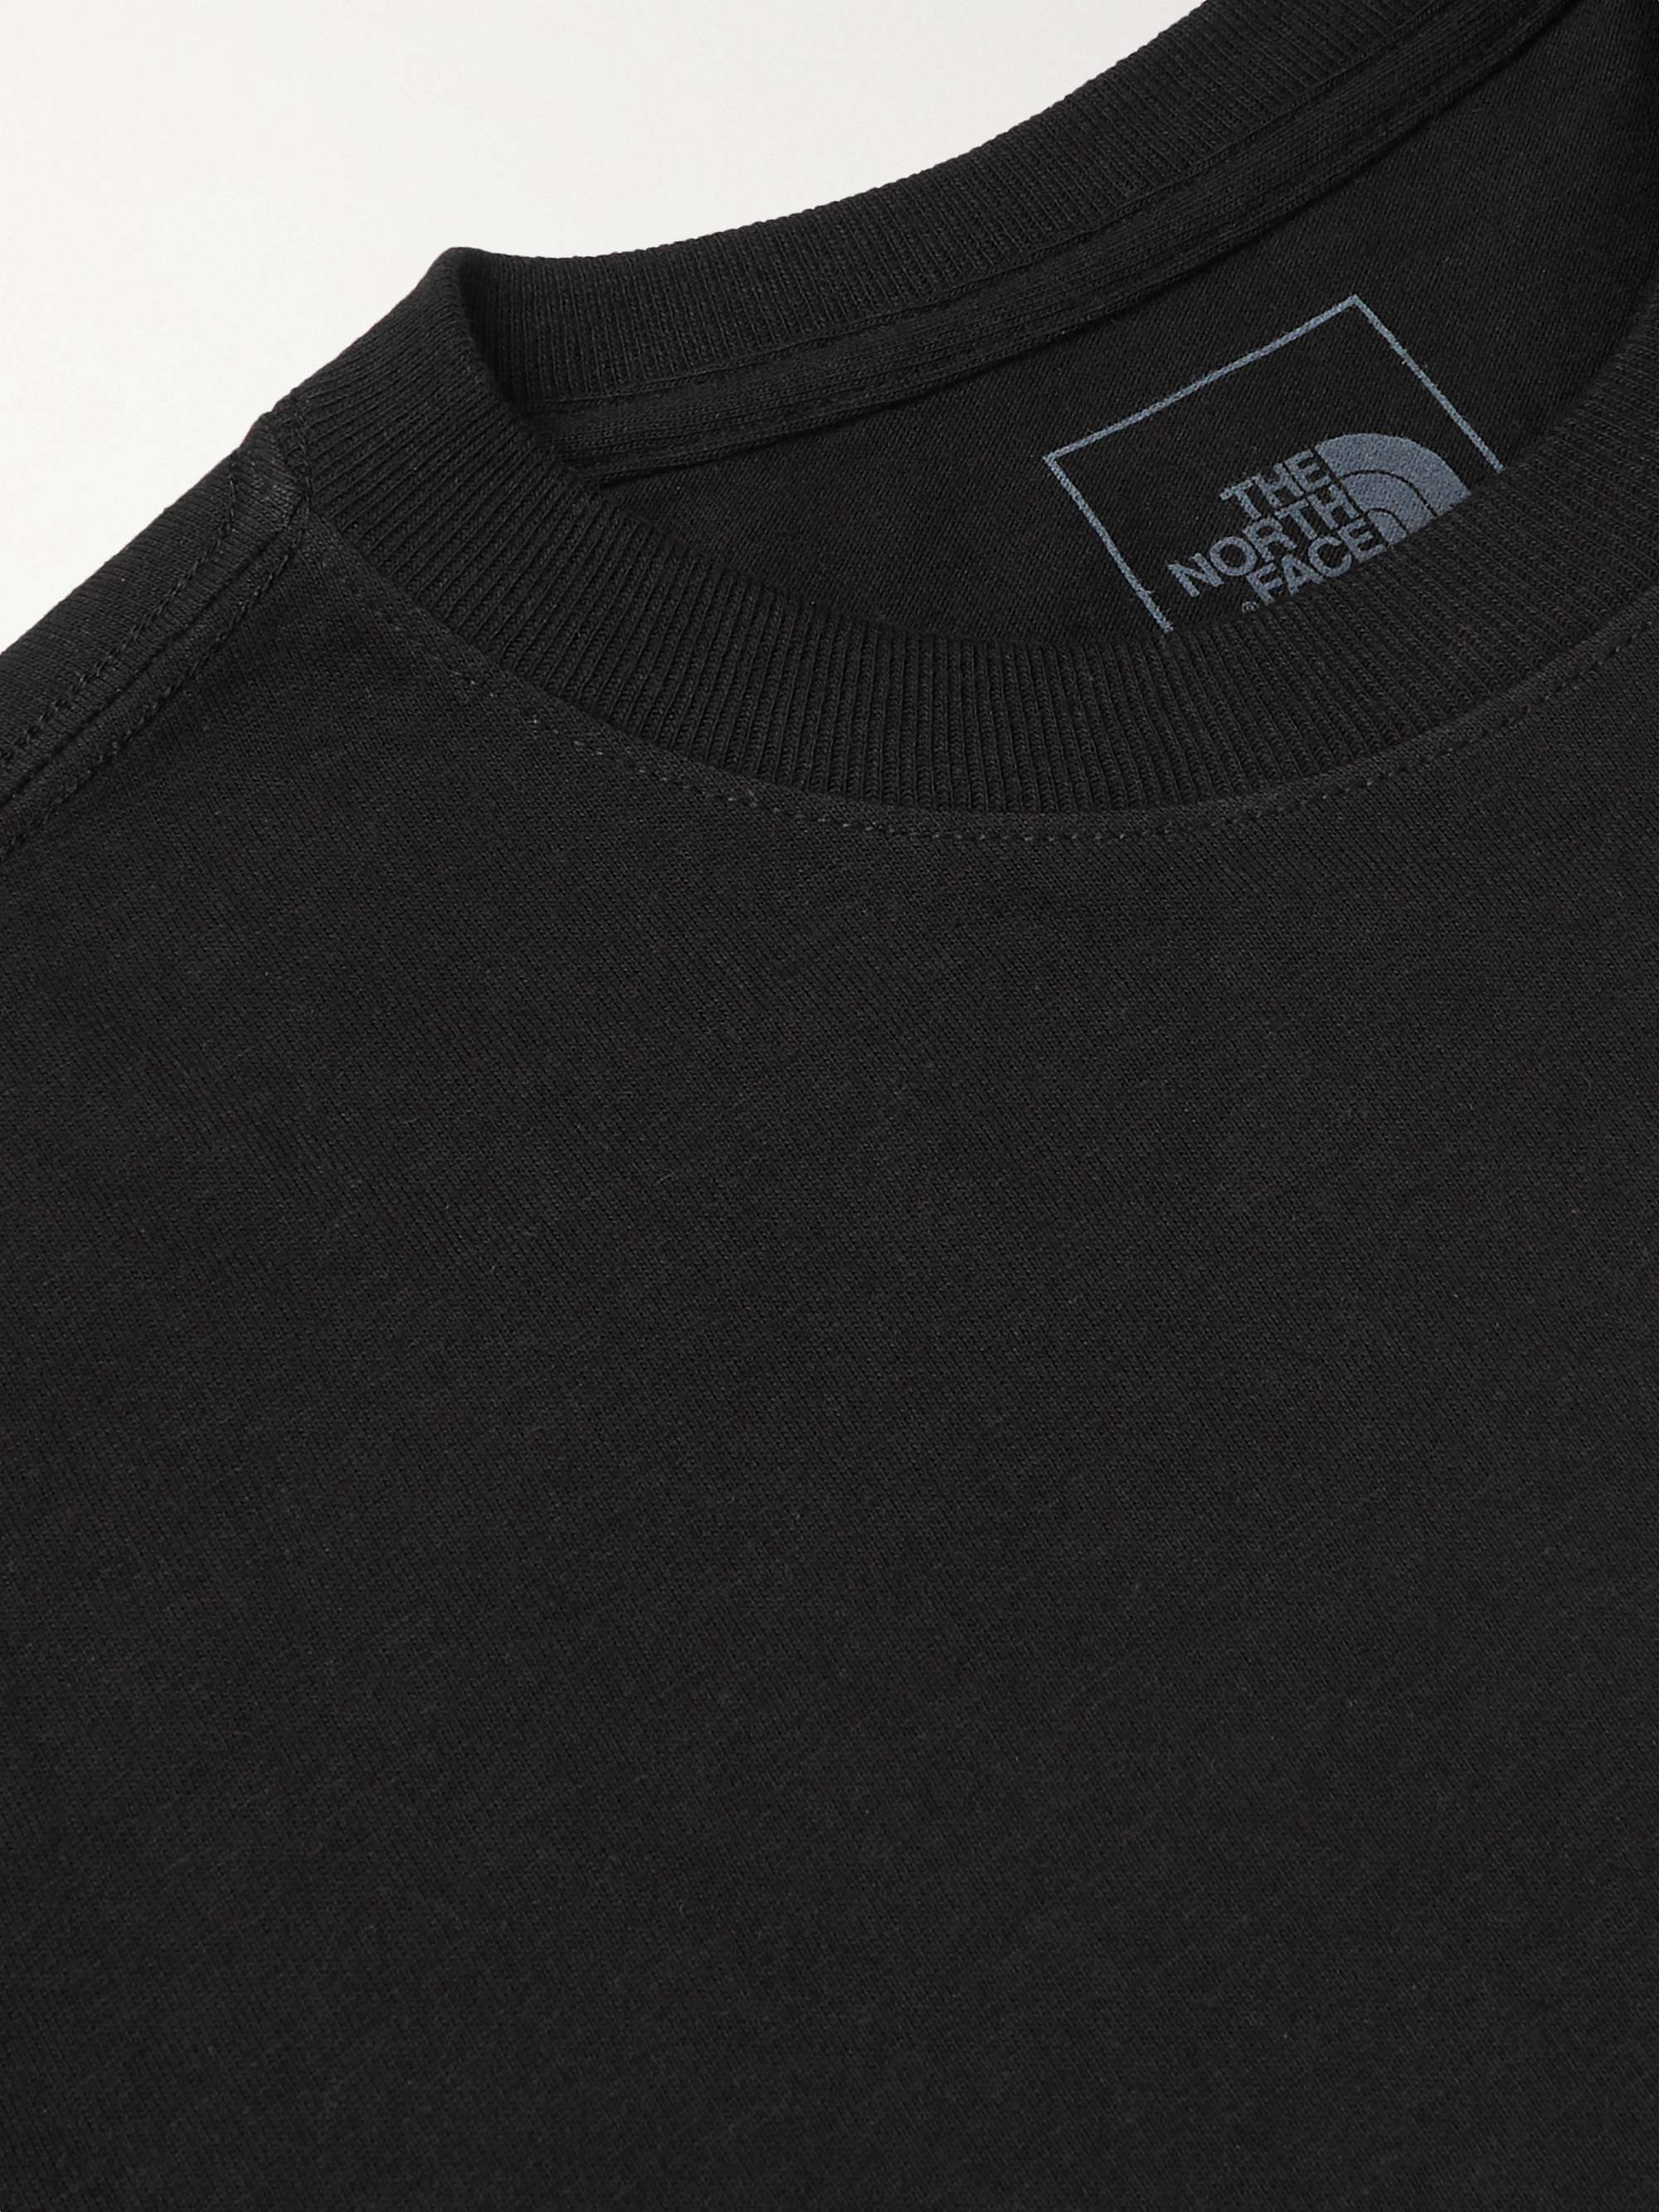 THE NORTH FACE Logo-Print Cotton-Jersey T-Shirt